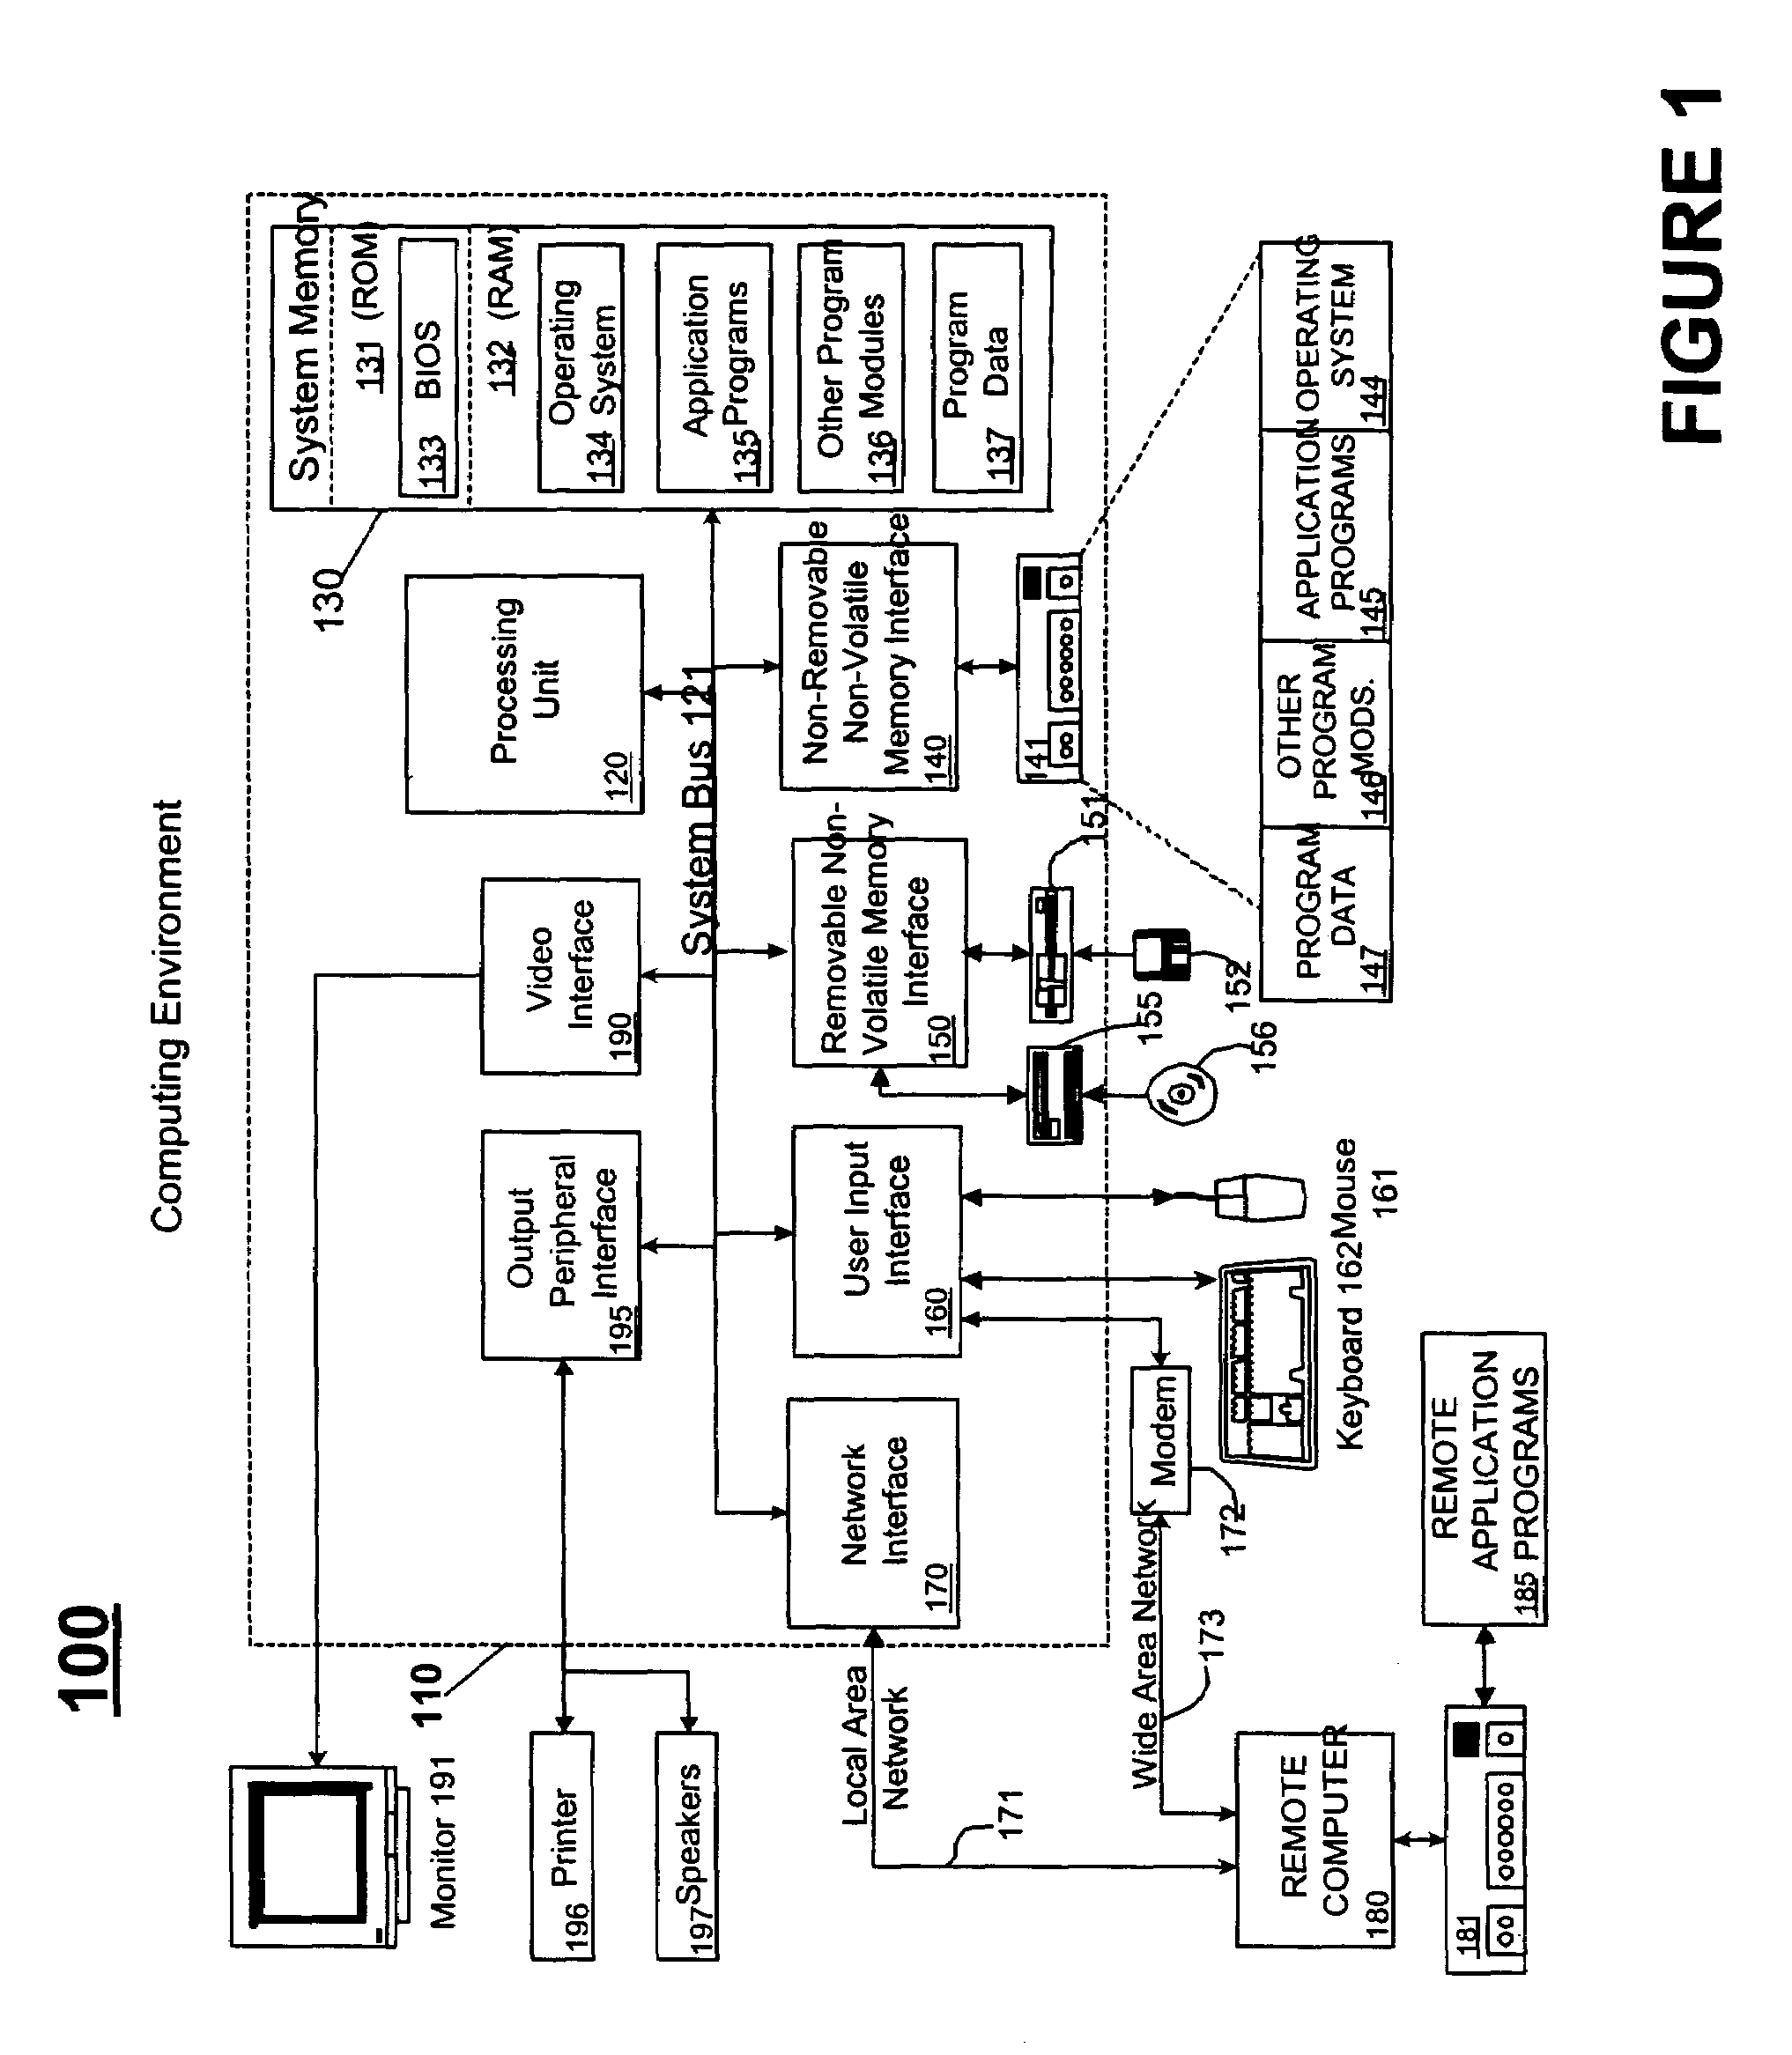 Method and system for fast application debugging